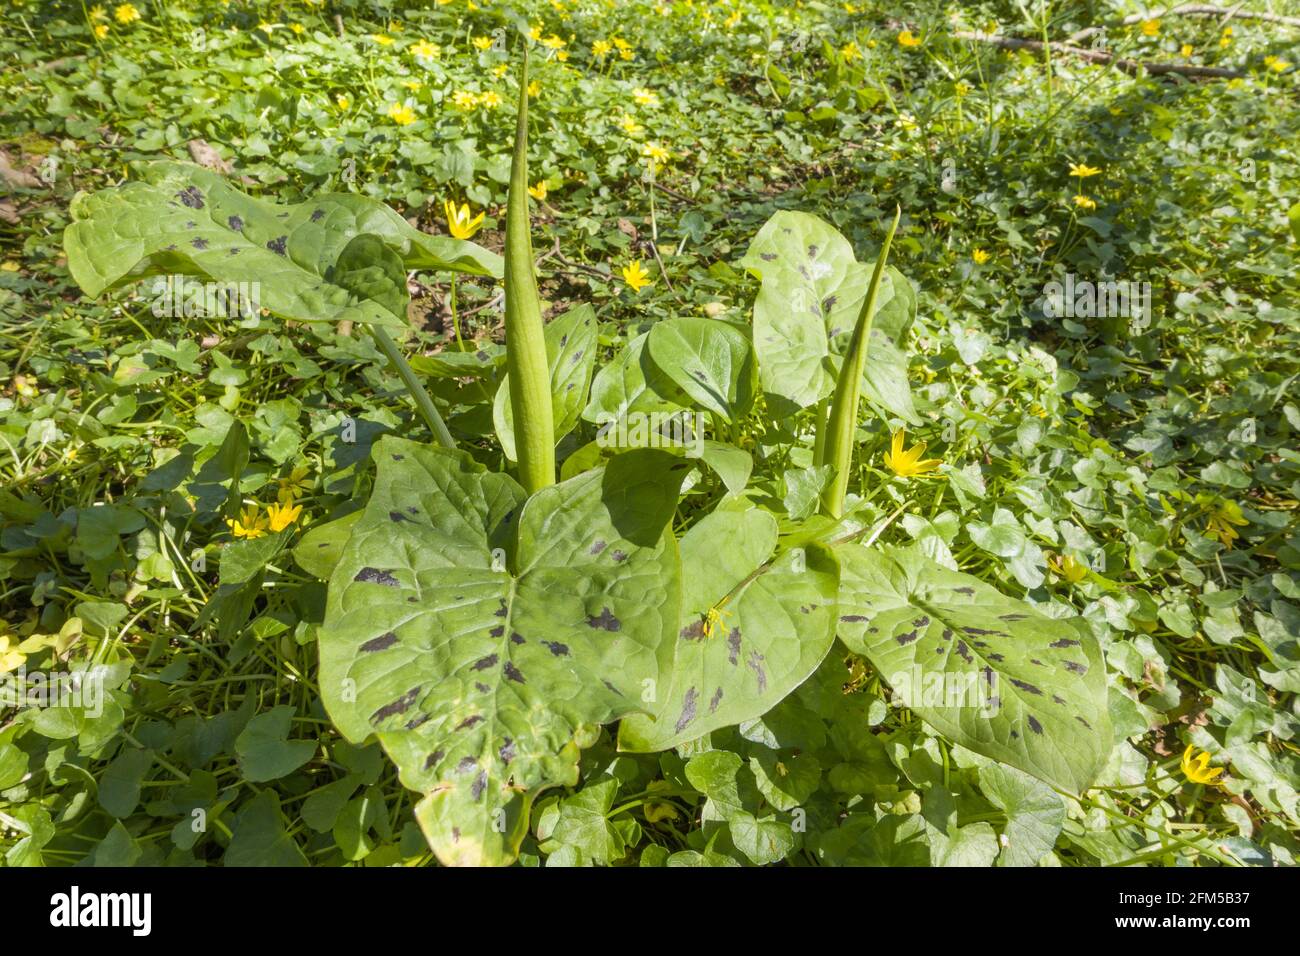 Lords and Ladies (Arum maculatum) also known as Cuckoo pint, growing on a nature reserve in the Herefordshire UK countryside. May 2021 Stock Photo